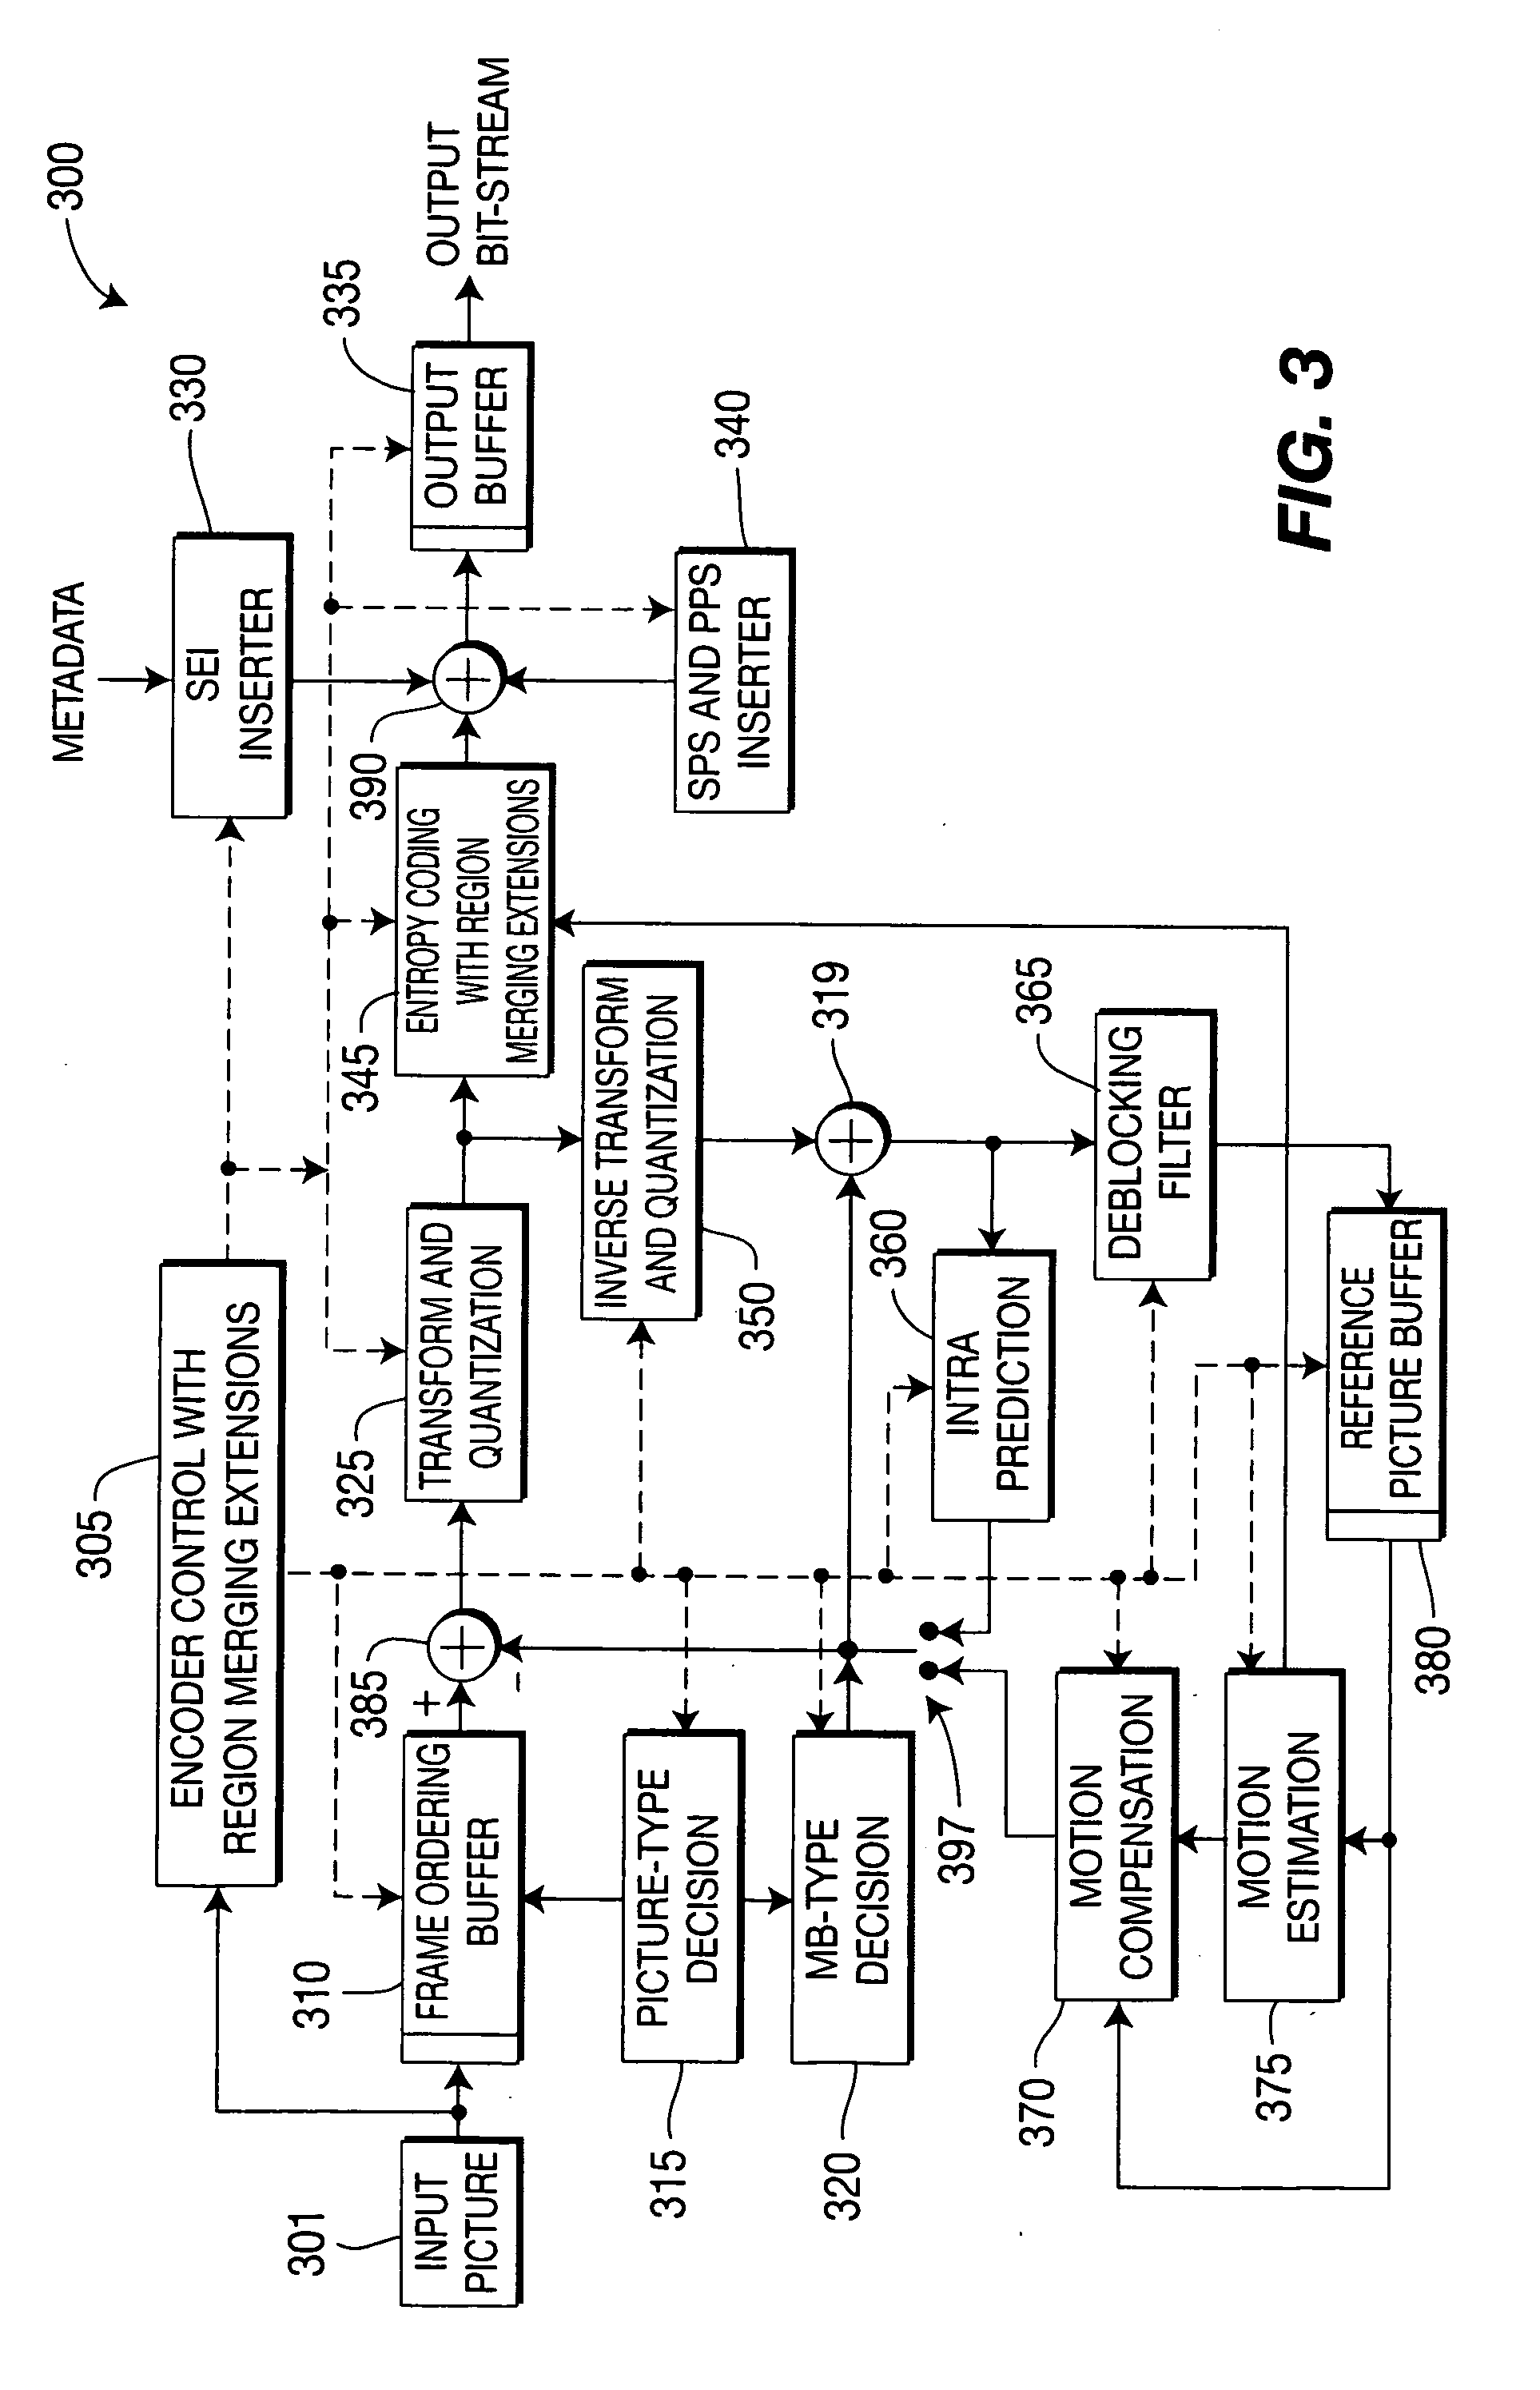 Method and apparatus for context dependent merging for skip-direct modes for video encoding and decoding